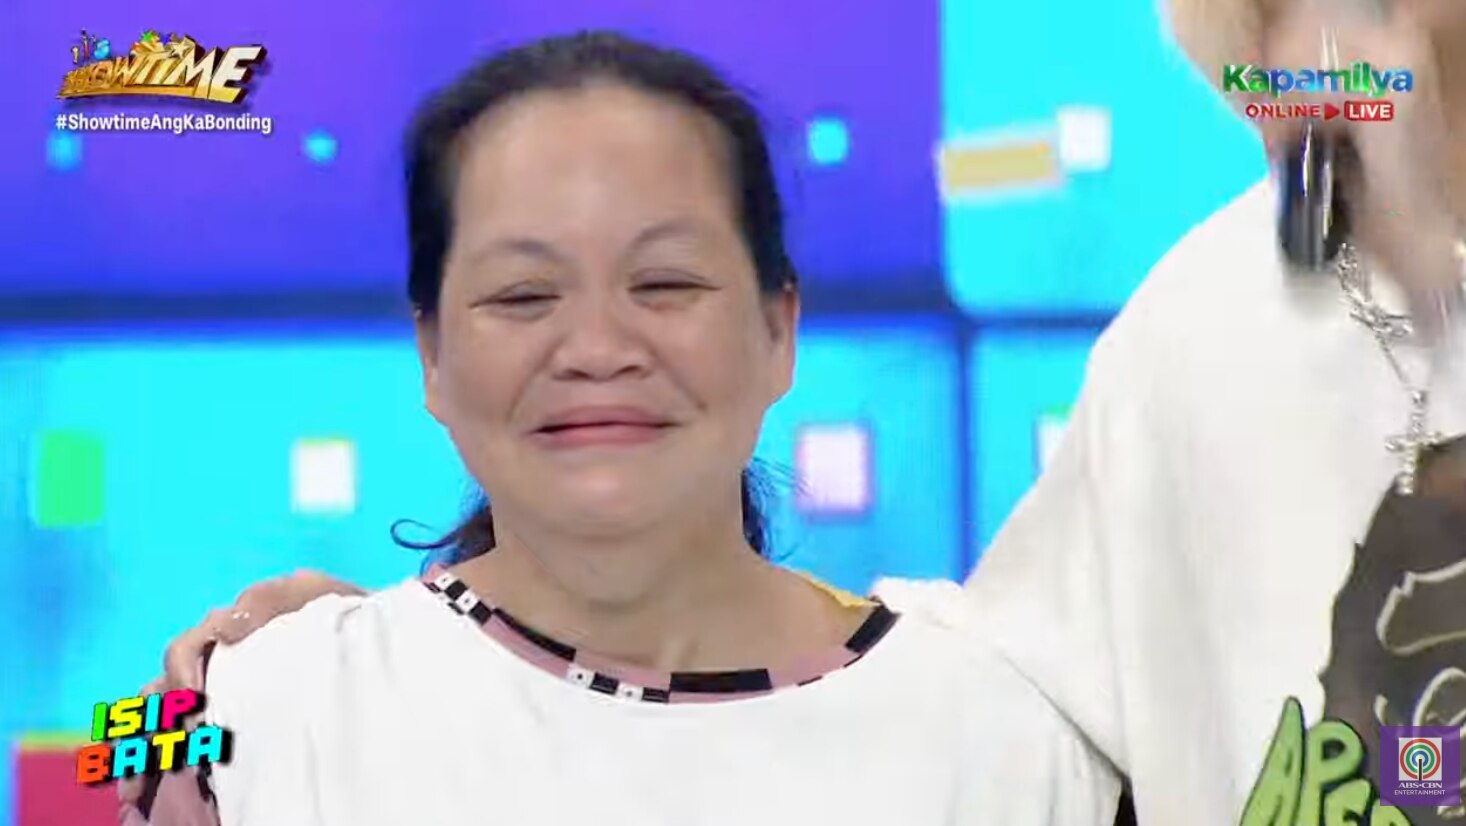 Single mom from Manila wins P750,000 in "Isip Bata"